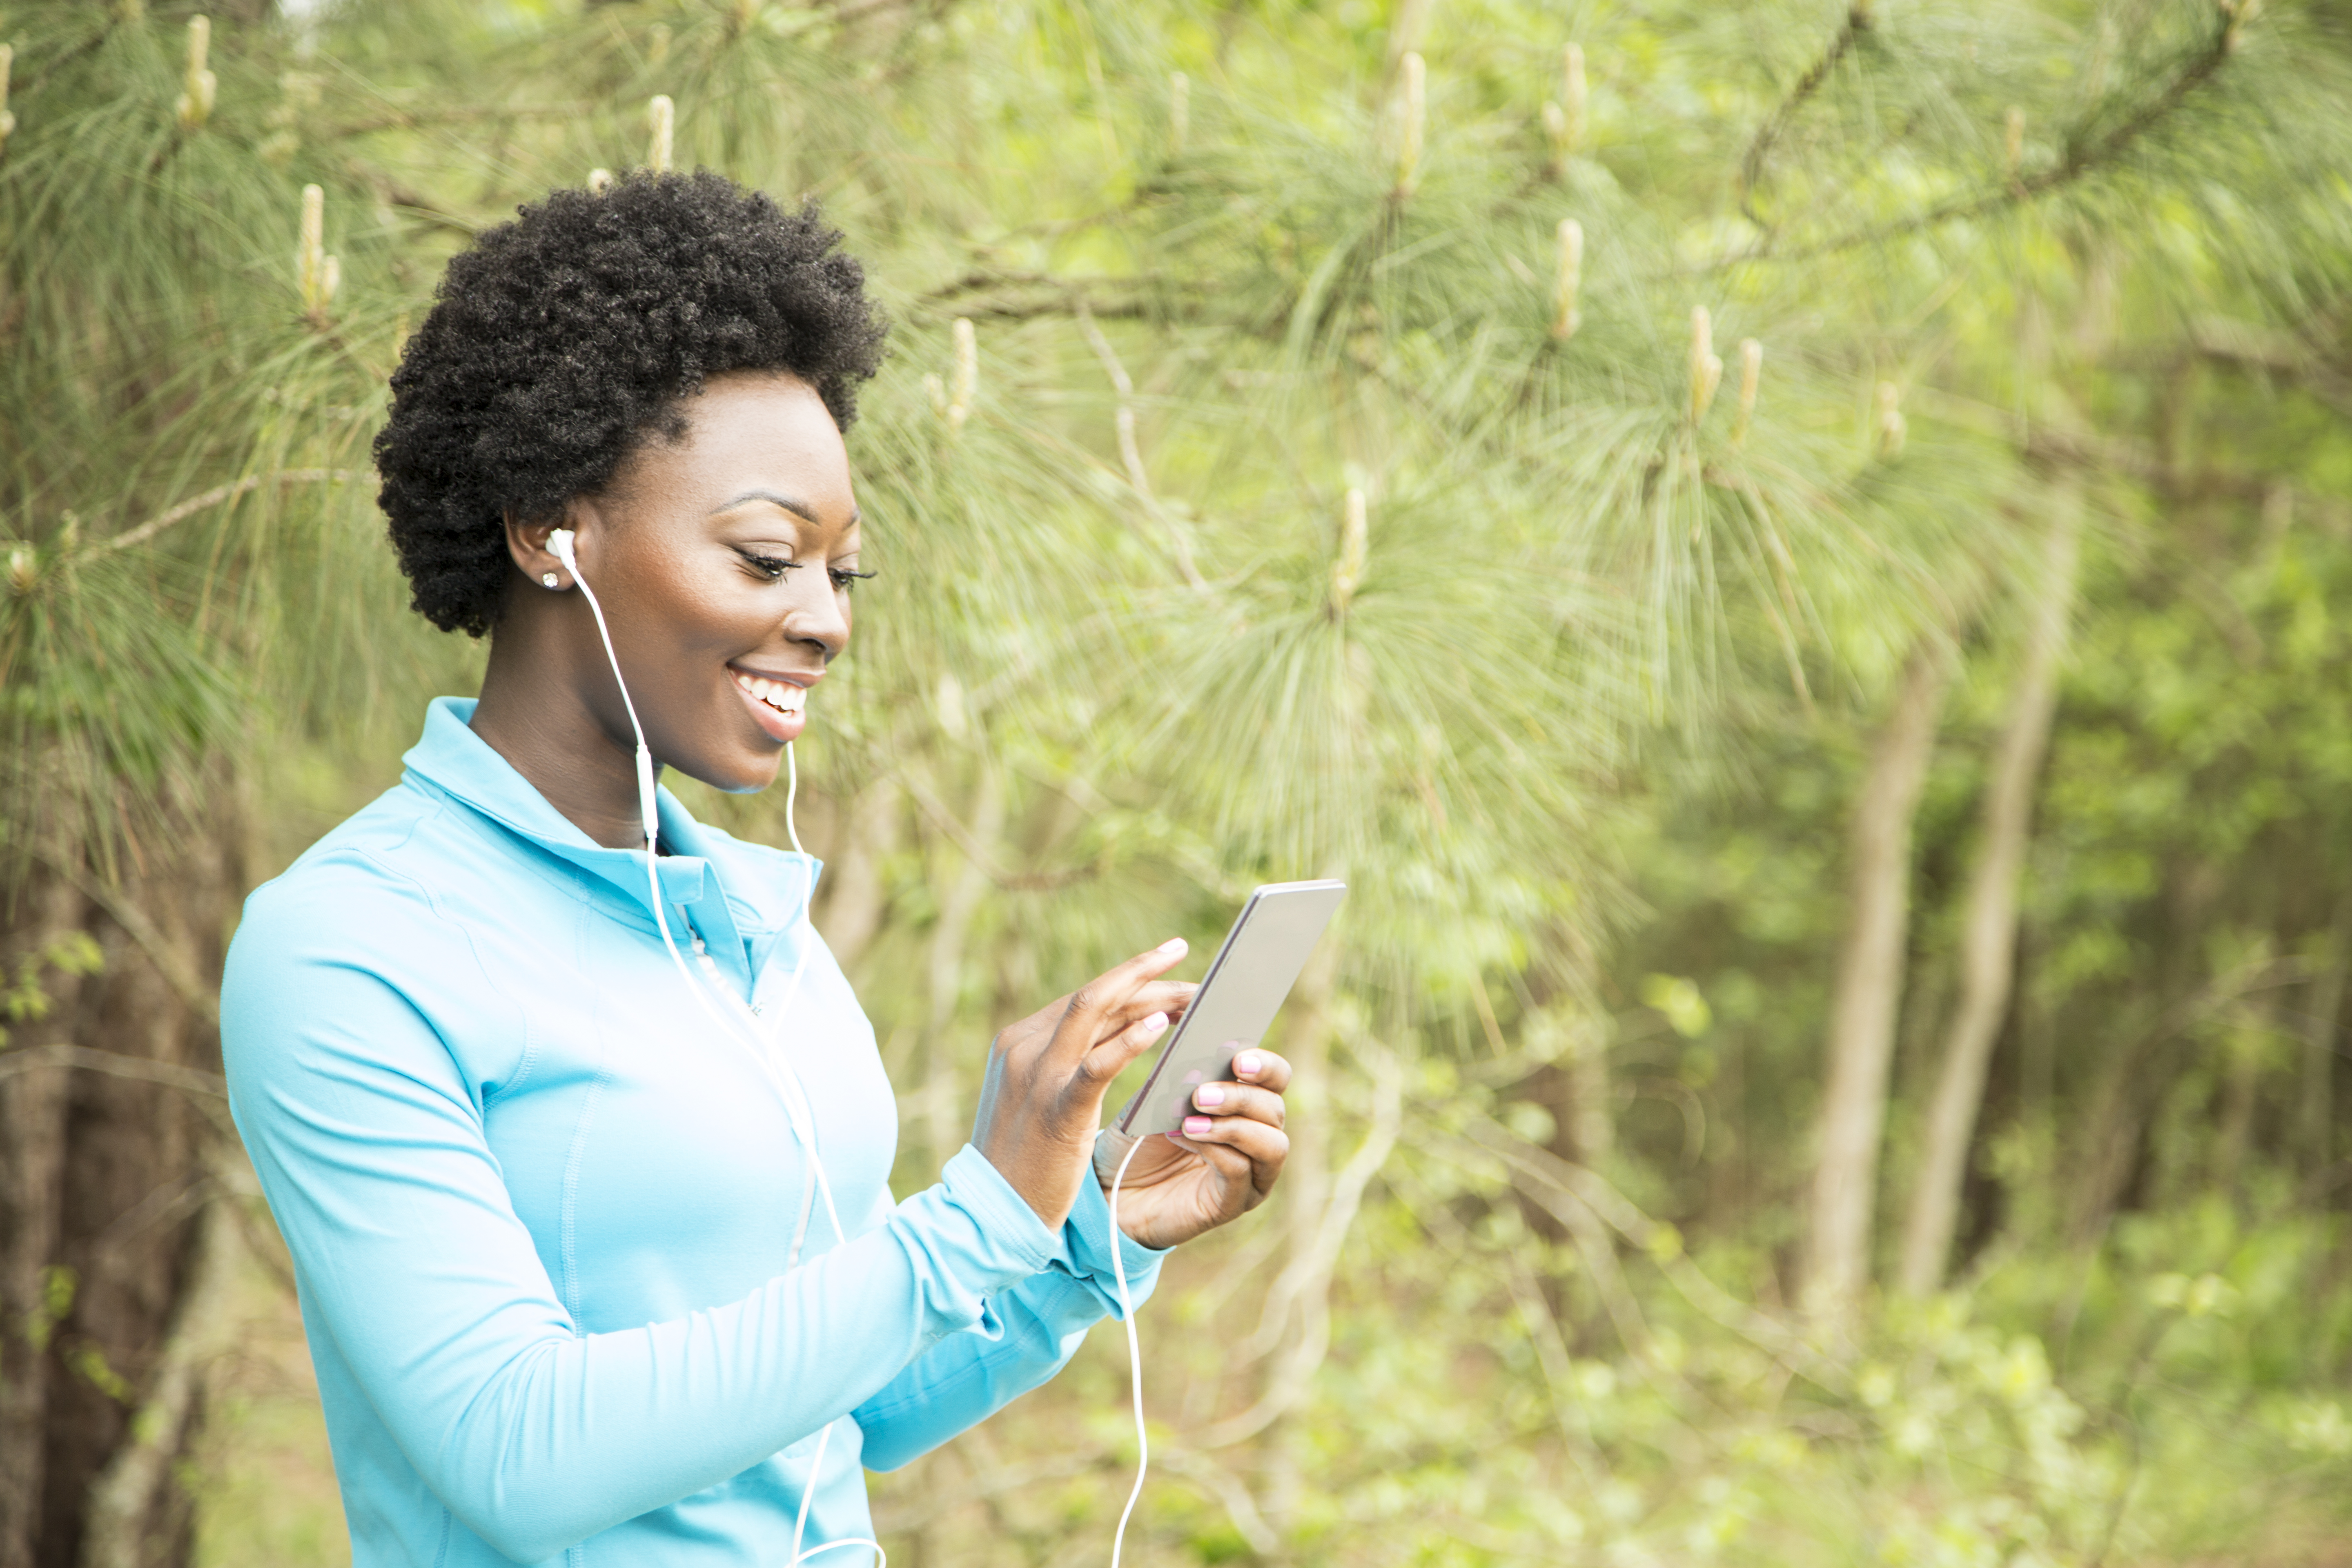 One African descent woman exercising, using cell phone in neighborhood park.